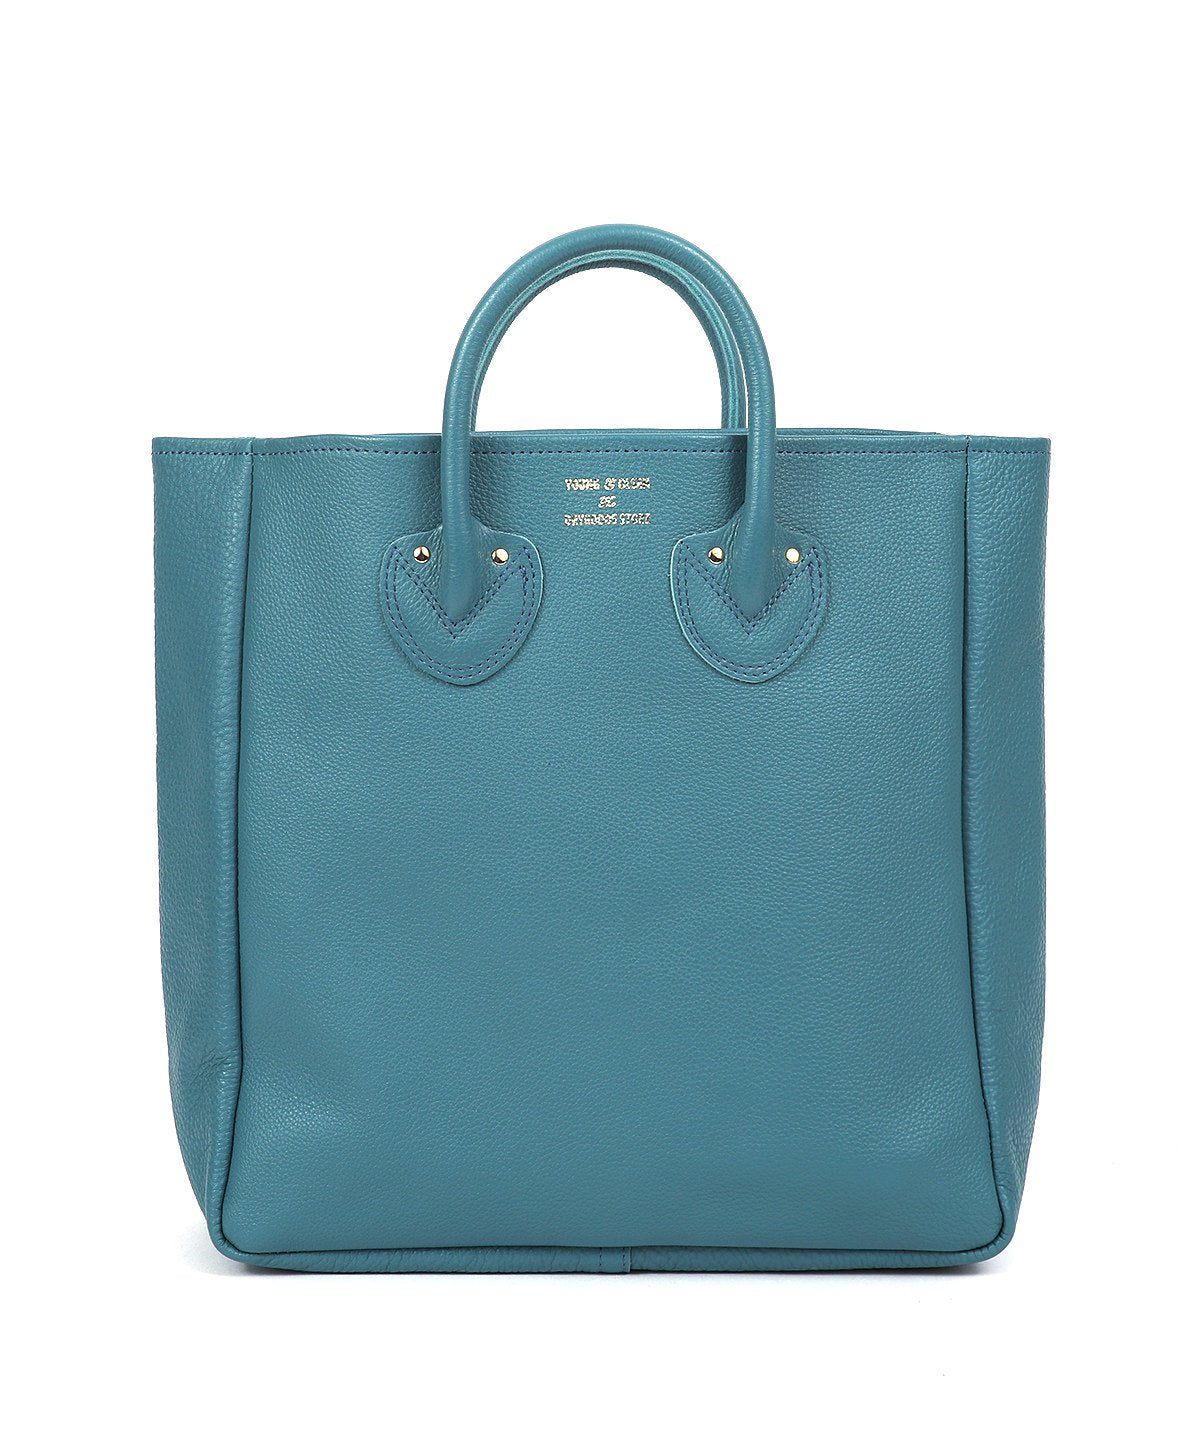 EMBOSSED LEATHER TOTE M